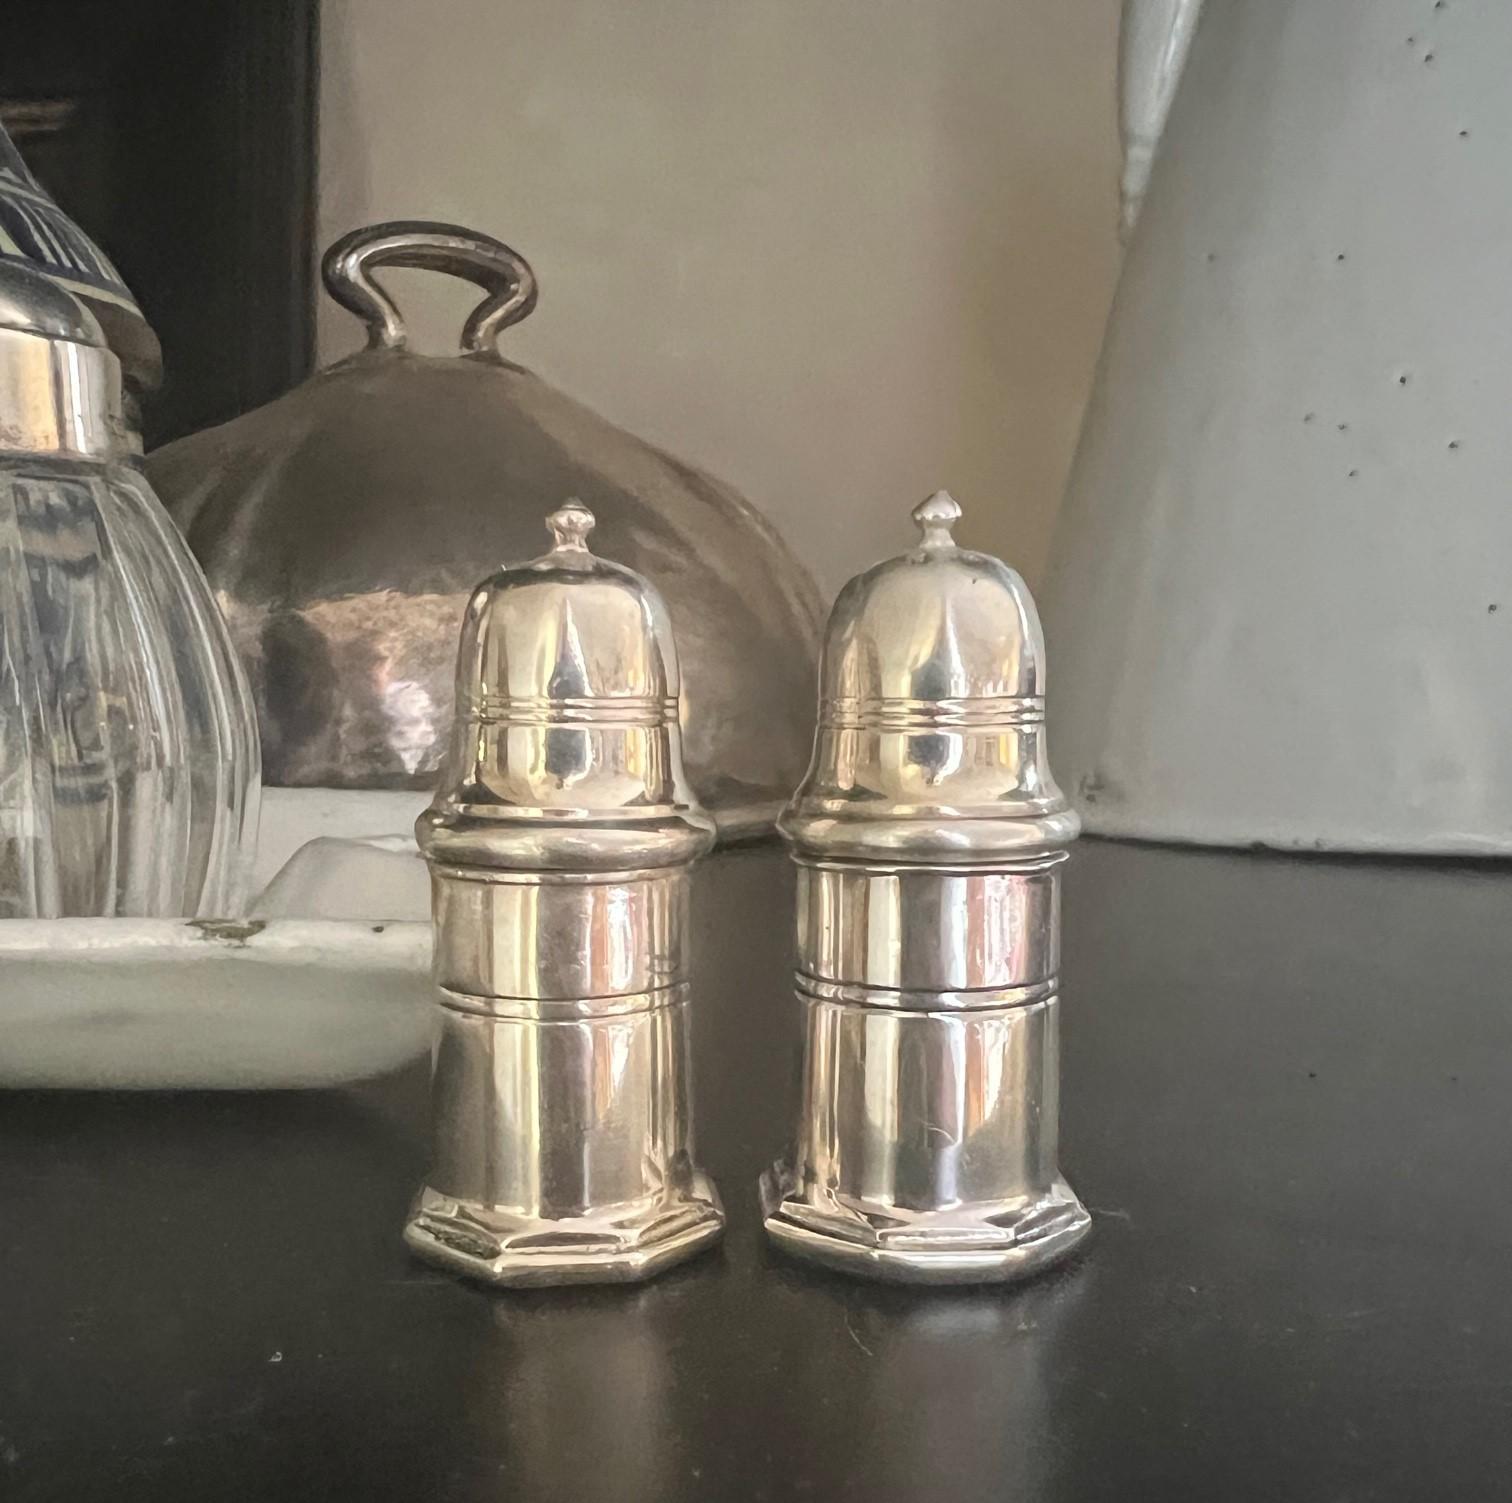 Small vintage silver plated salt and pepper set made in France by Christofle. Each shaker has a locking system built in and each include the impressed Christofle marks. The set includes the original box.